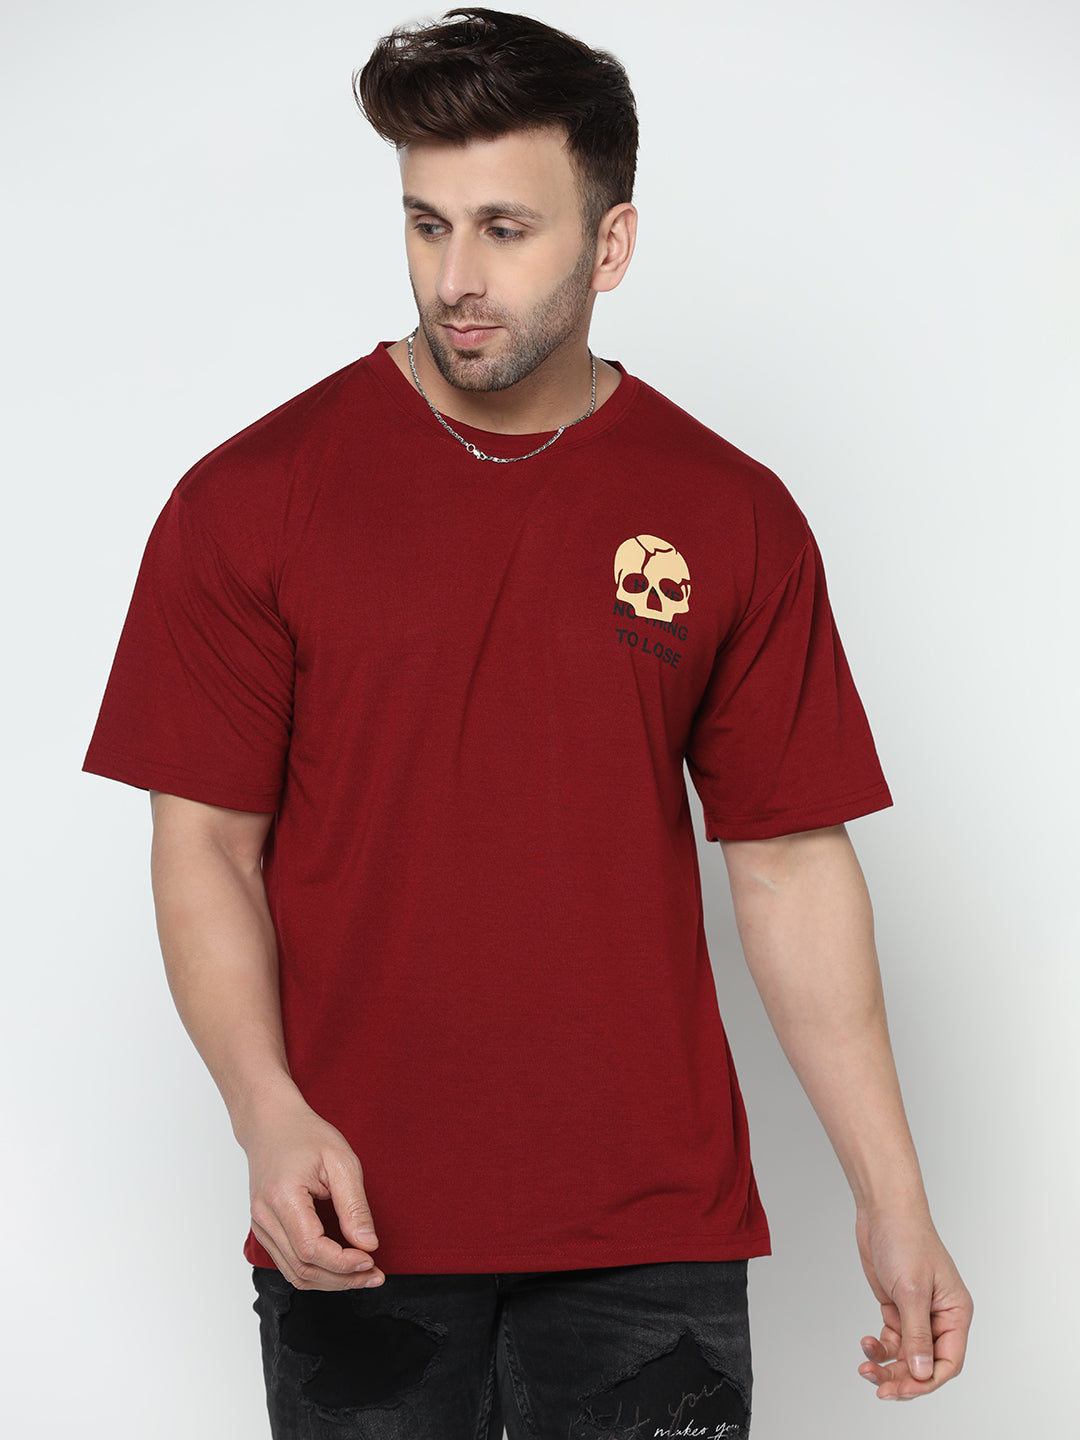 Oversized Maroon Half Sleeve Have Nothing to Lose Printed T-Shirt